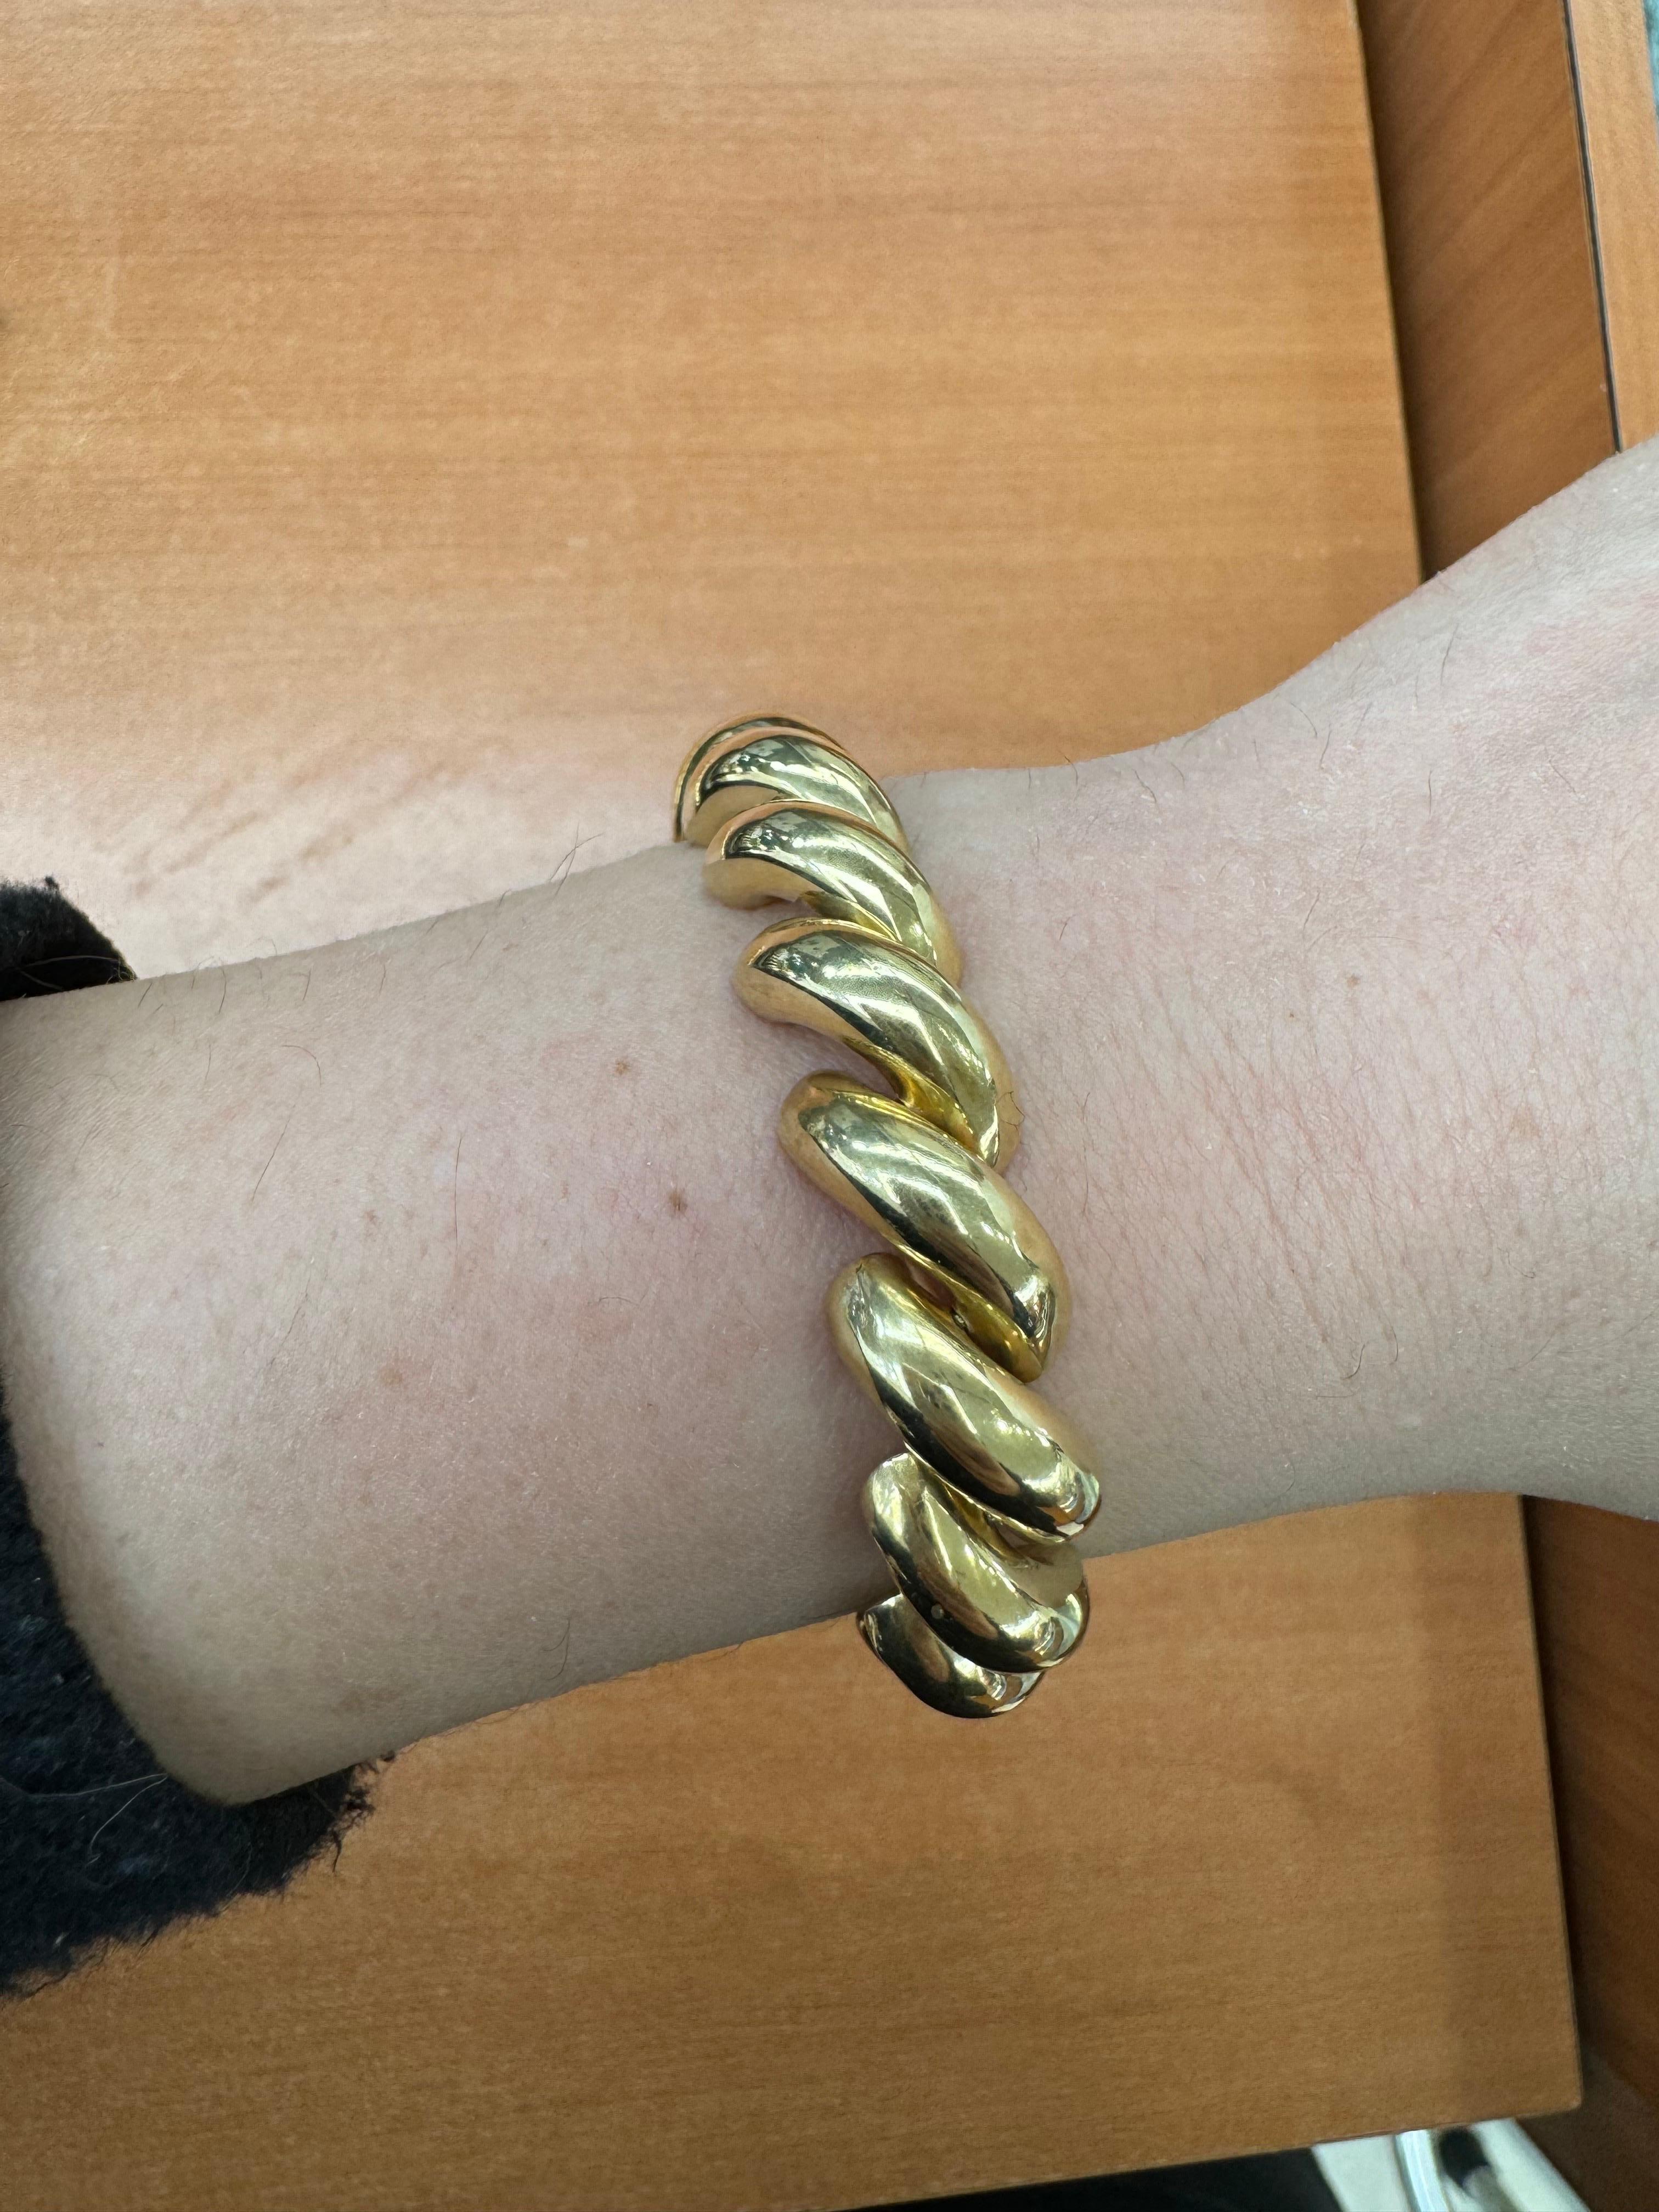 San Marco medium size link bracelet in a high polish finish weighing 25.1 grams in 14 karat yellow gold. 
More San Marco styles in stock
DM for pictures. 